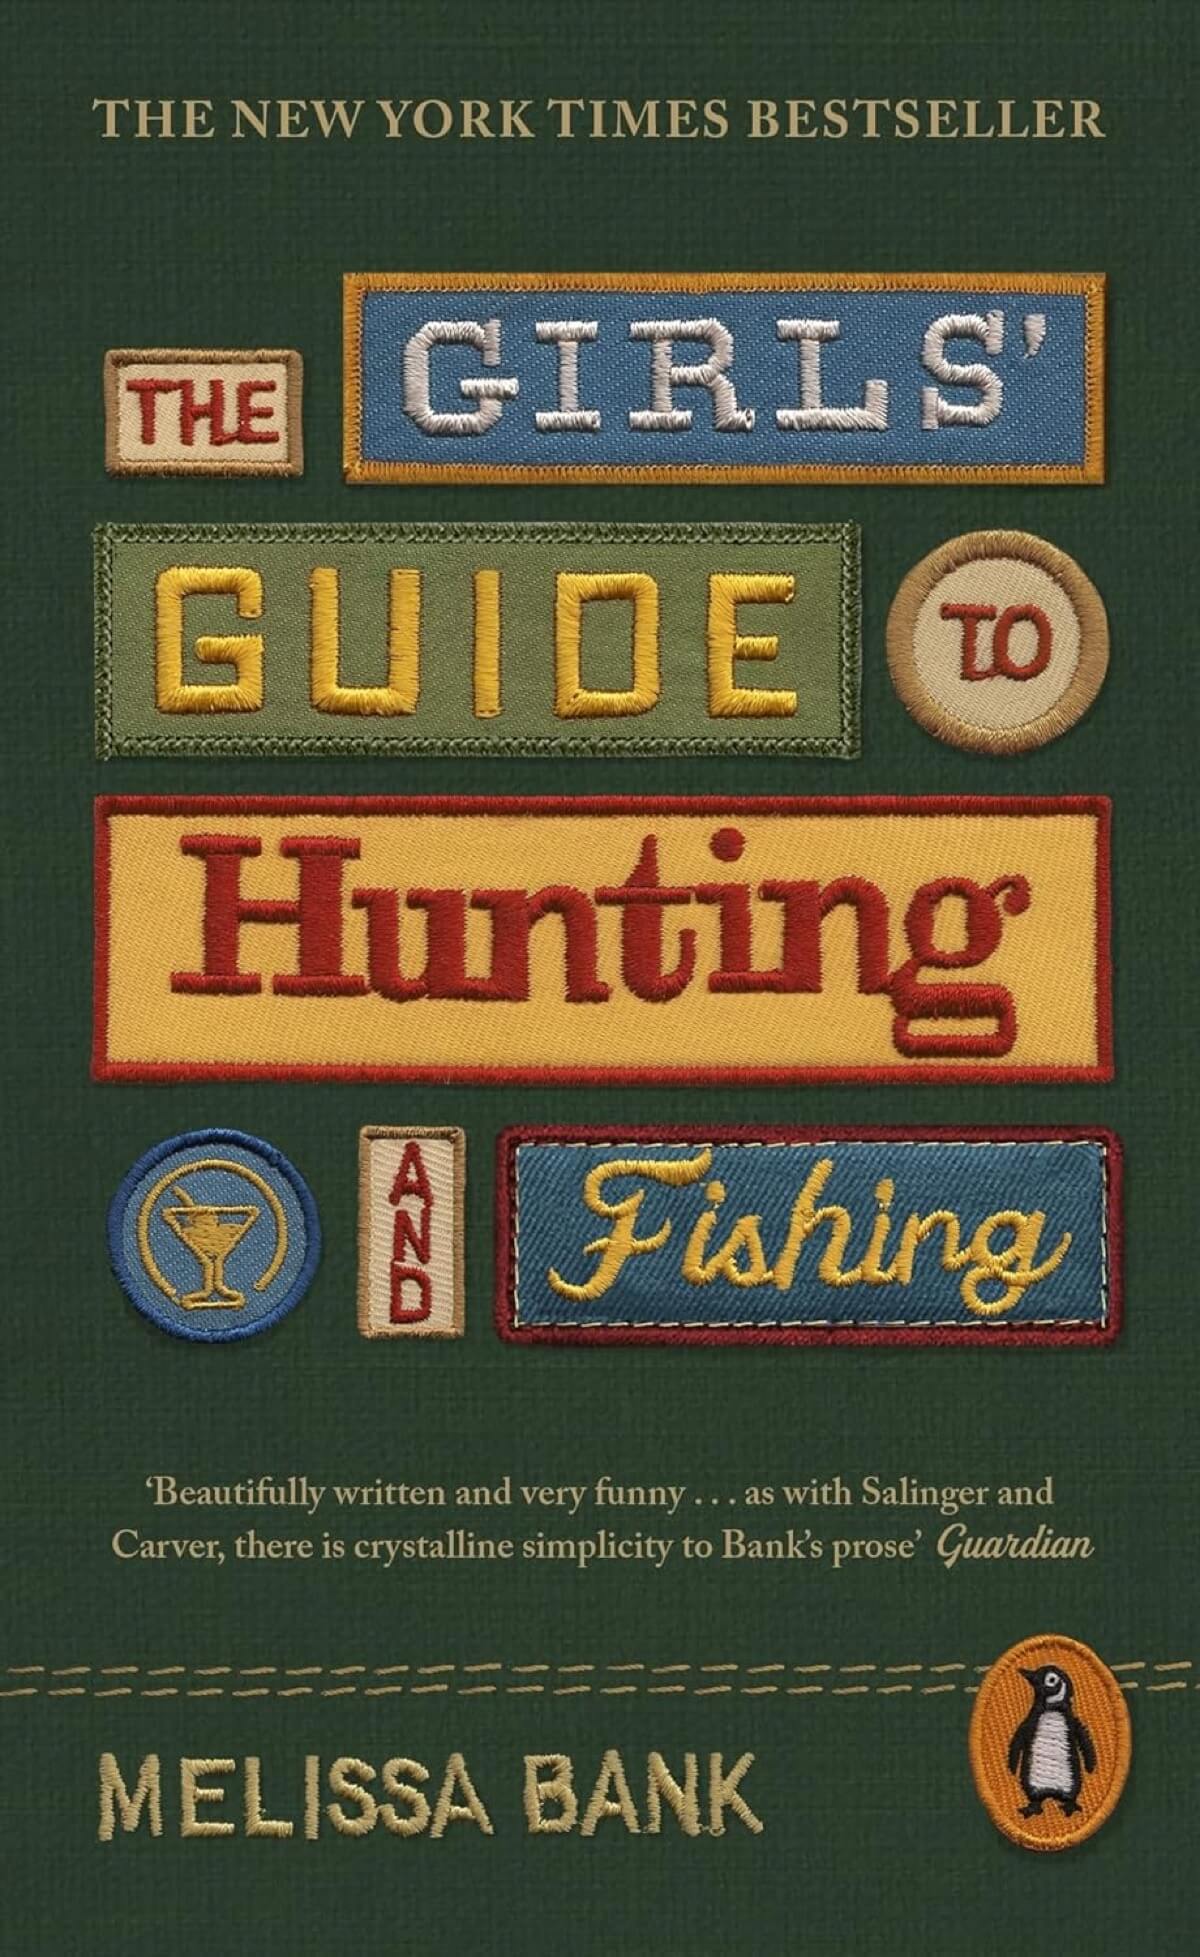 The cover of The Girls' Guide to Hunting and Fishing